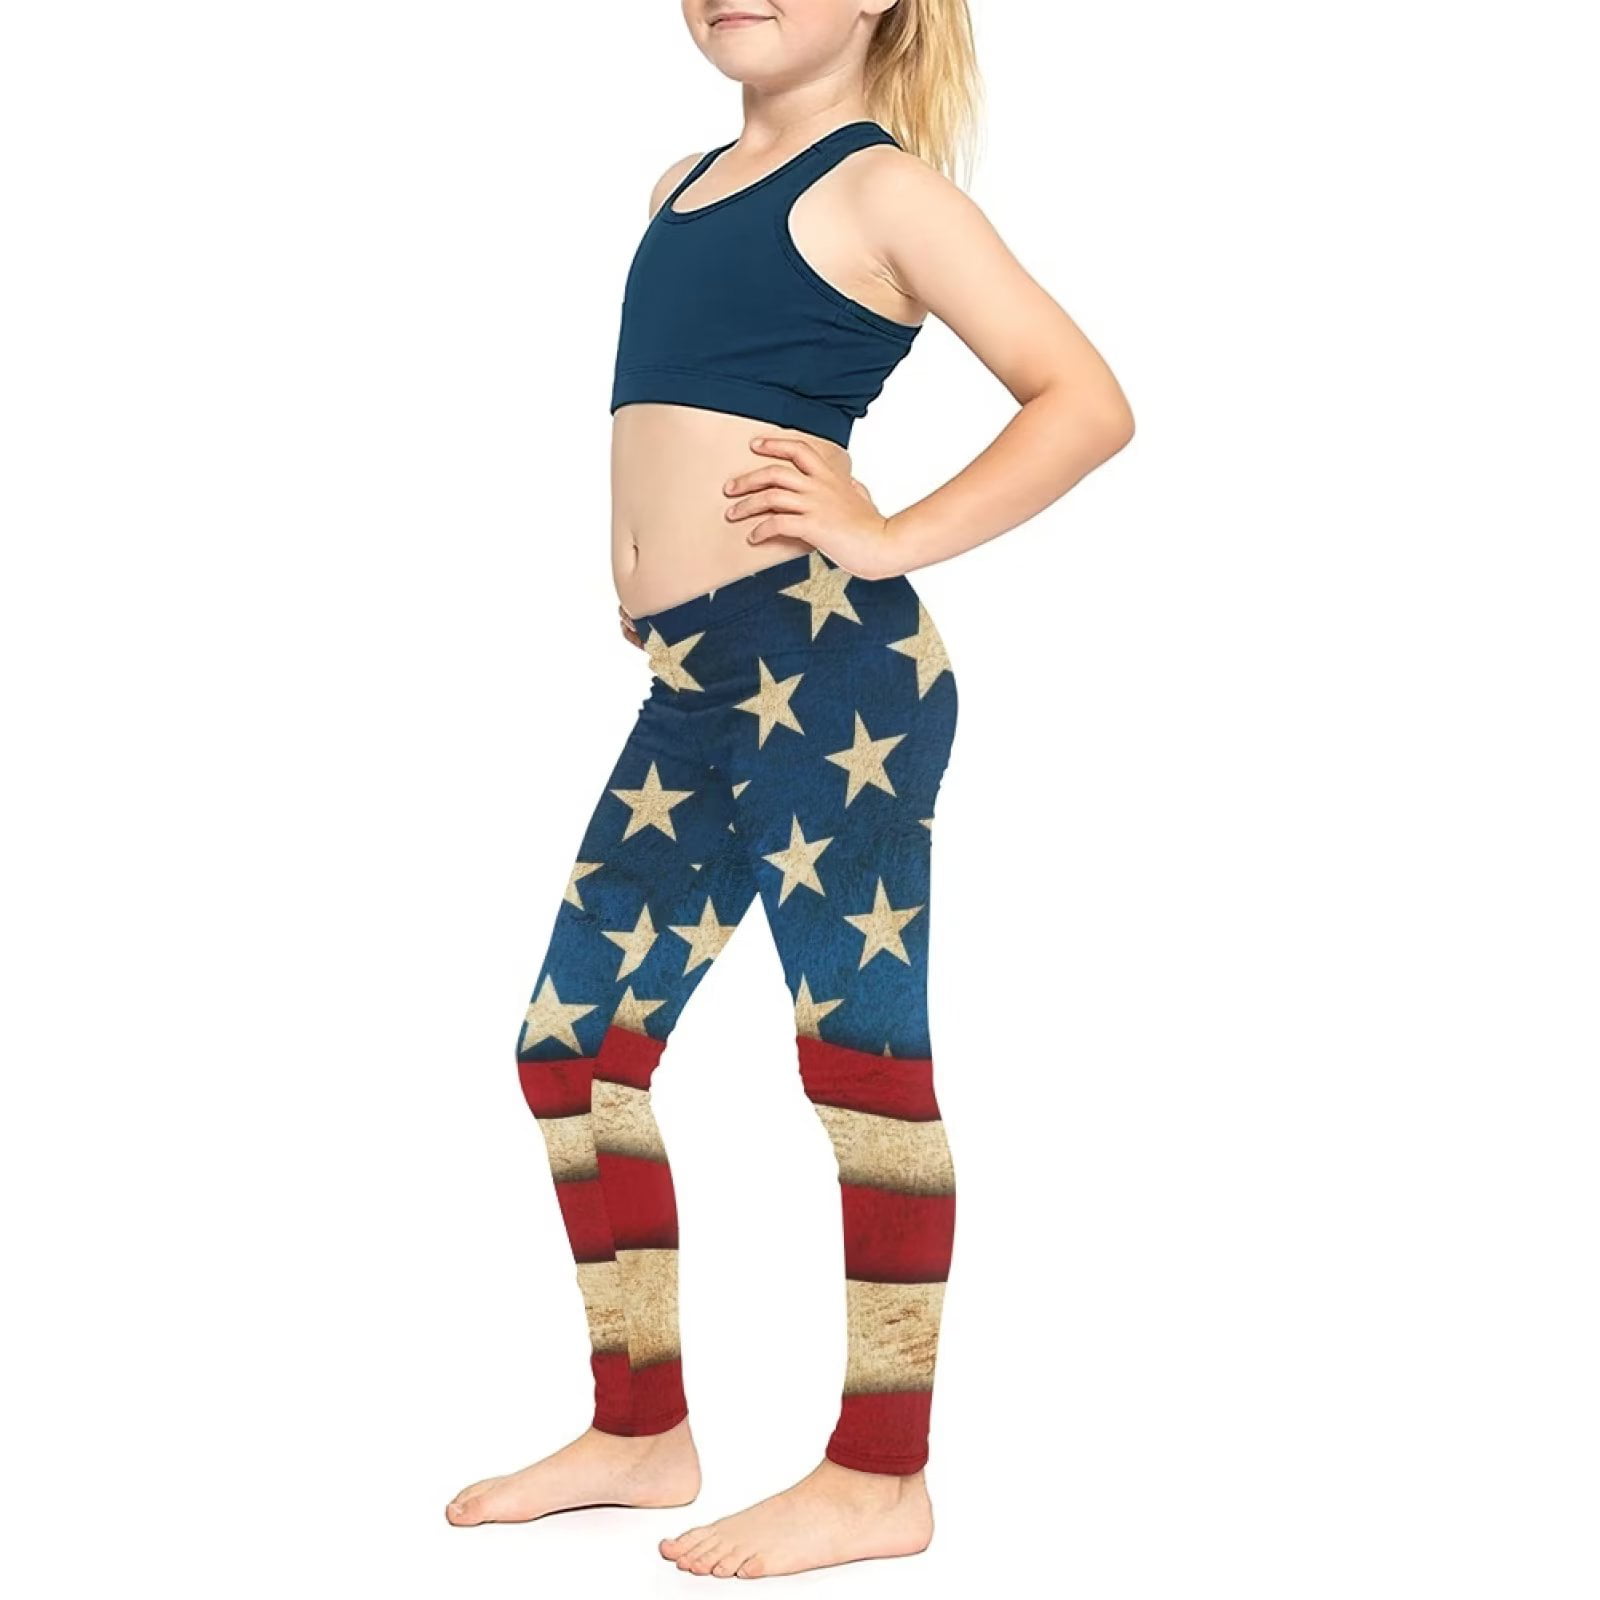 FKELYI American Flag Girls Leggings Size 6-7 Years Lightweight Training  Teen Girls Yoga Pants High Waisted Leisure Active Tights,4 of July 